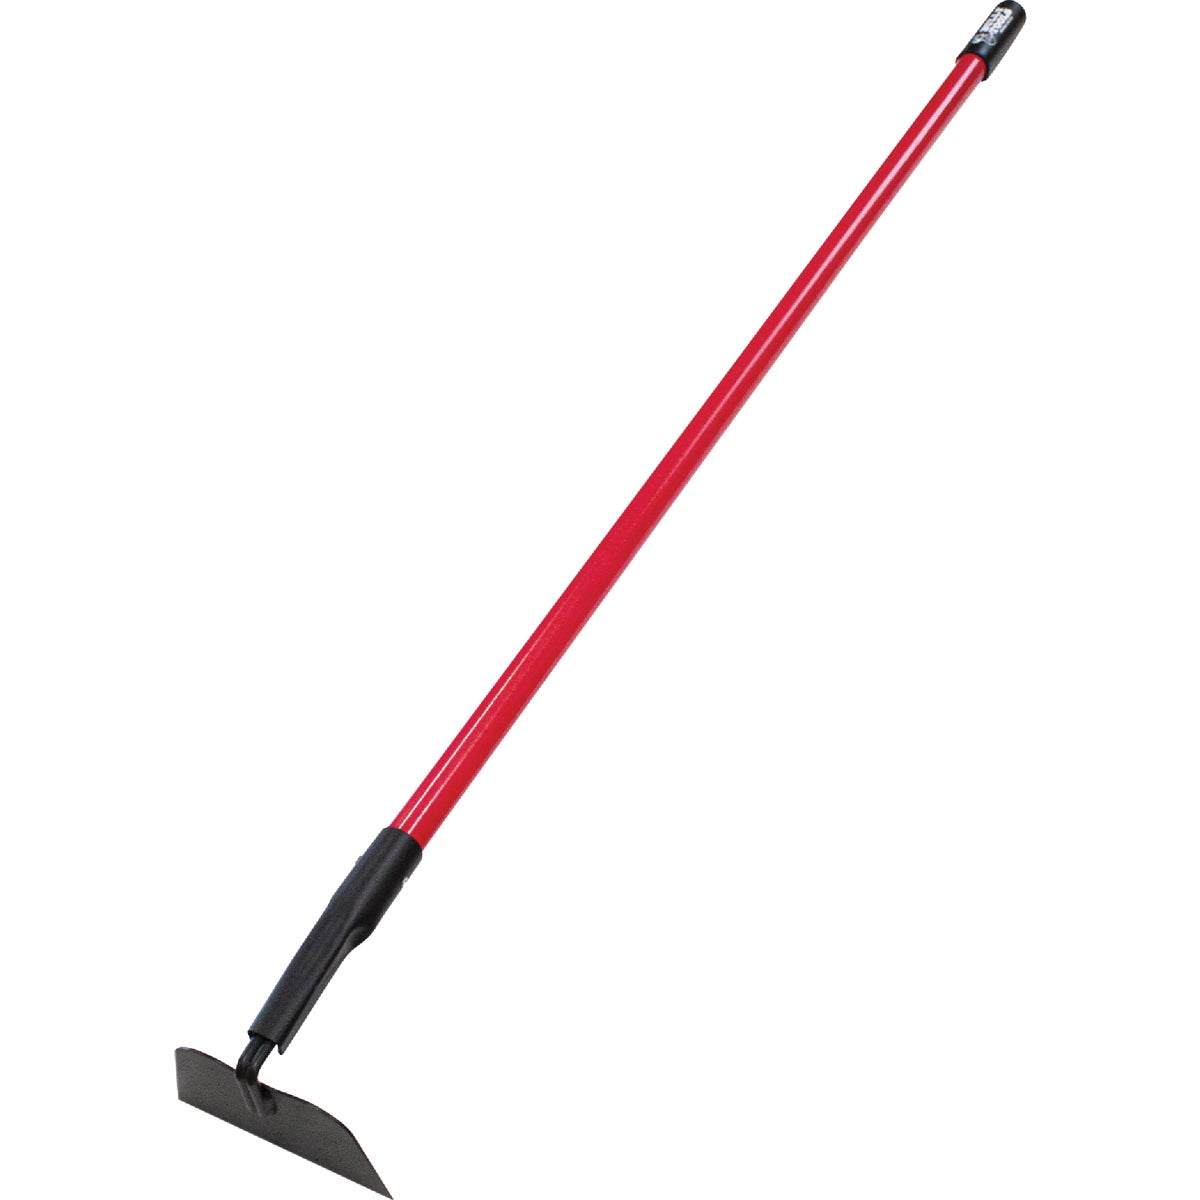 Item 709506, Weeds are every gardeners biggest challenge, and our Garden Hoe by Bully 